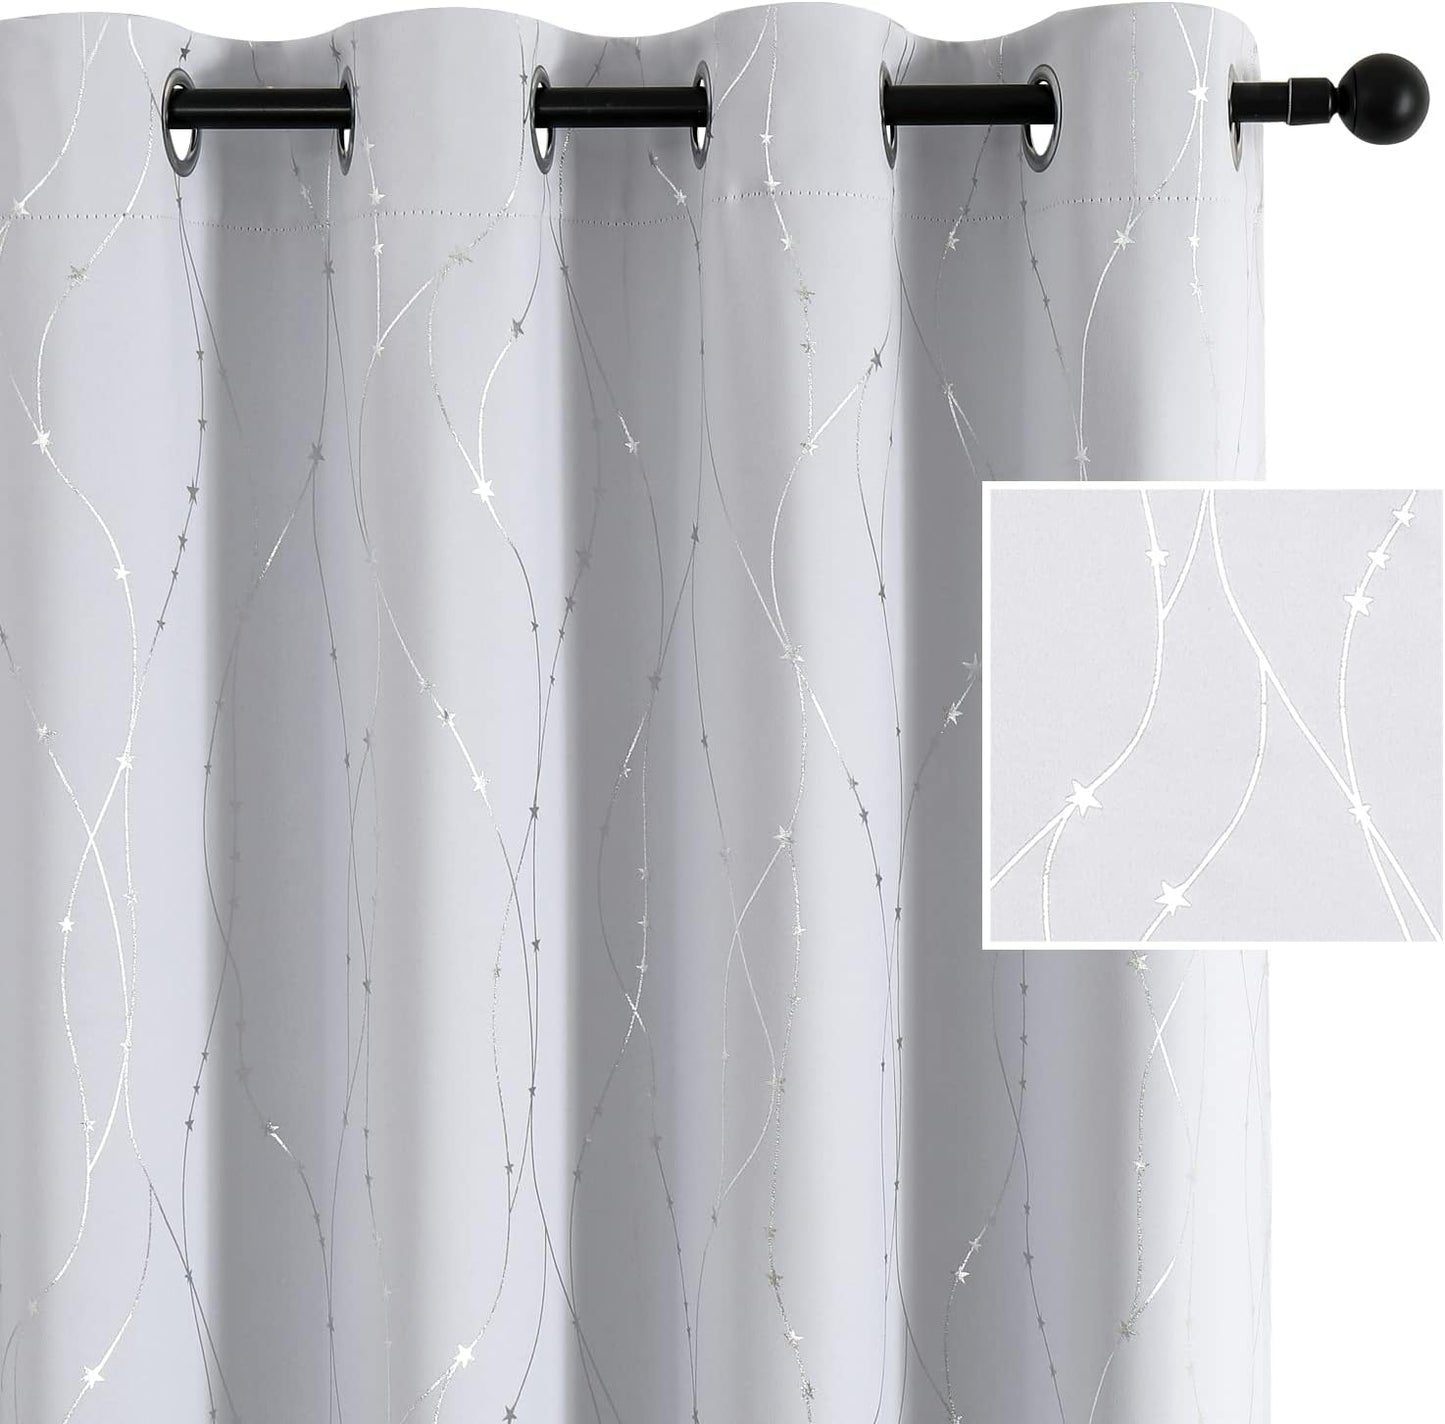 SMILE WEAVER Black Blackout Curtains for Bedroom 72 Inch Long 2 Panels,Room Darkening Curtain with Gold Print Design Noise Reducing Thermal Insulated Window Treatment Drapes for Living Room  SMILE WEAVER Greyish White Silver 52Wx54L 